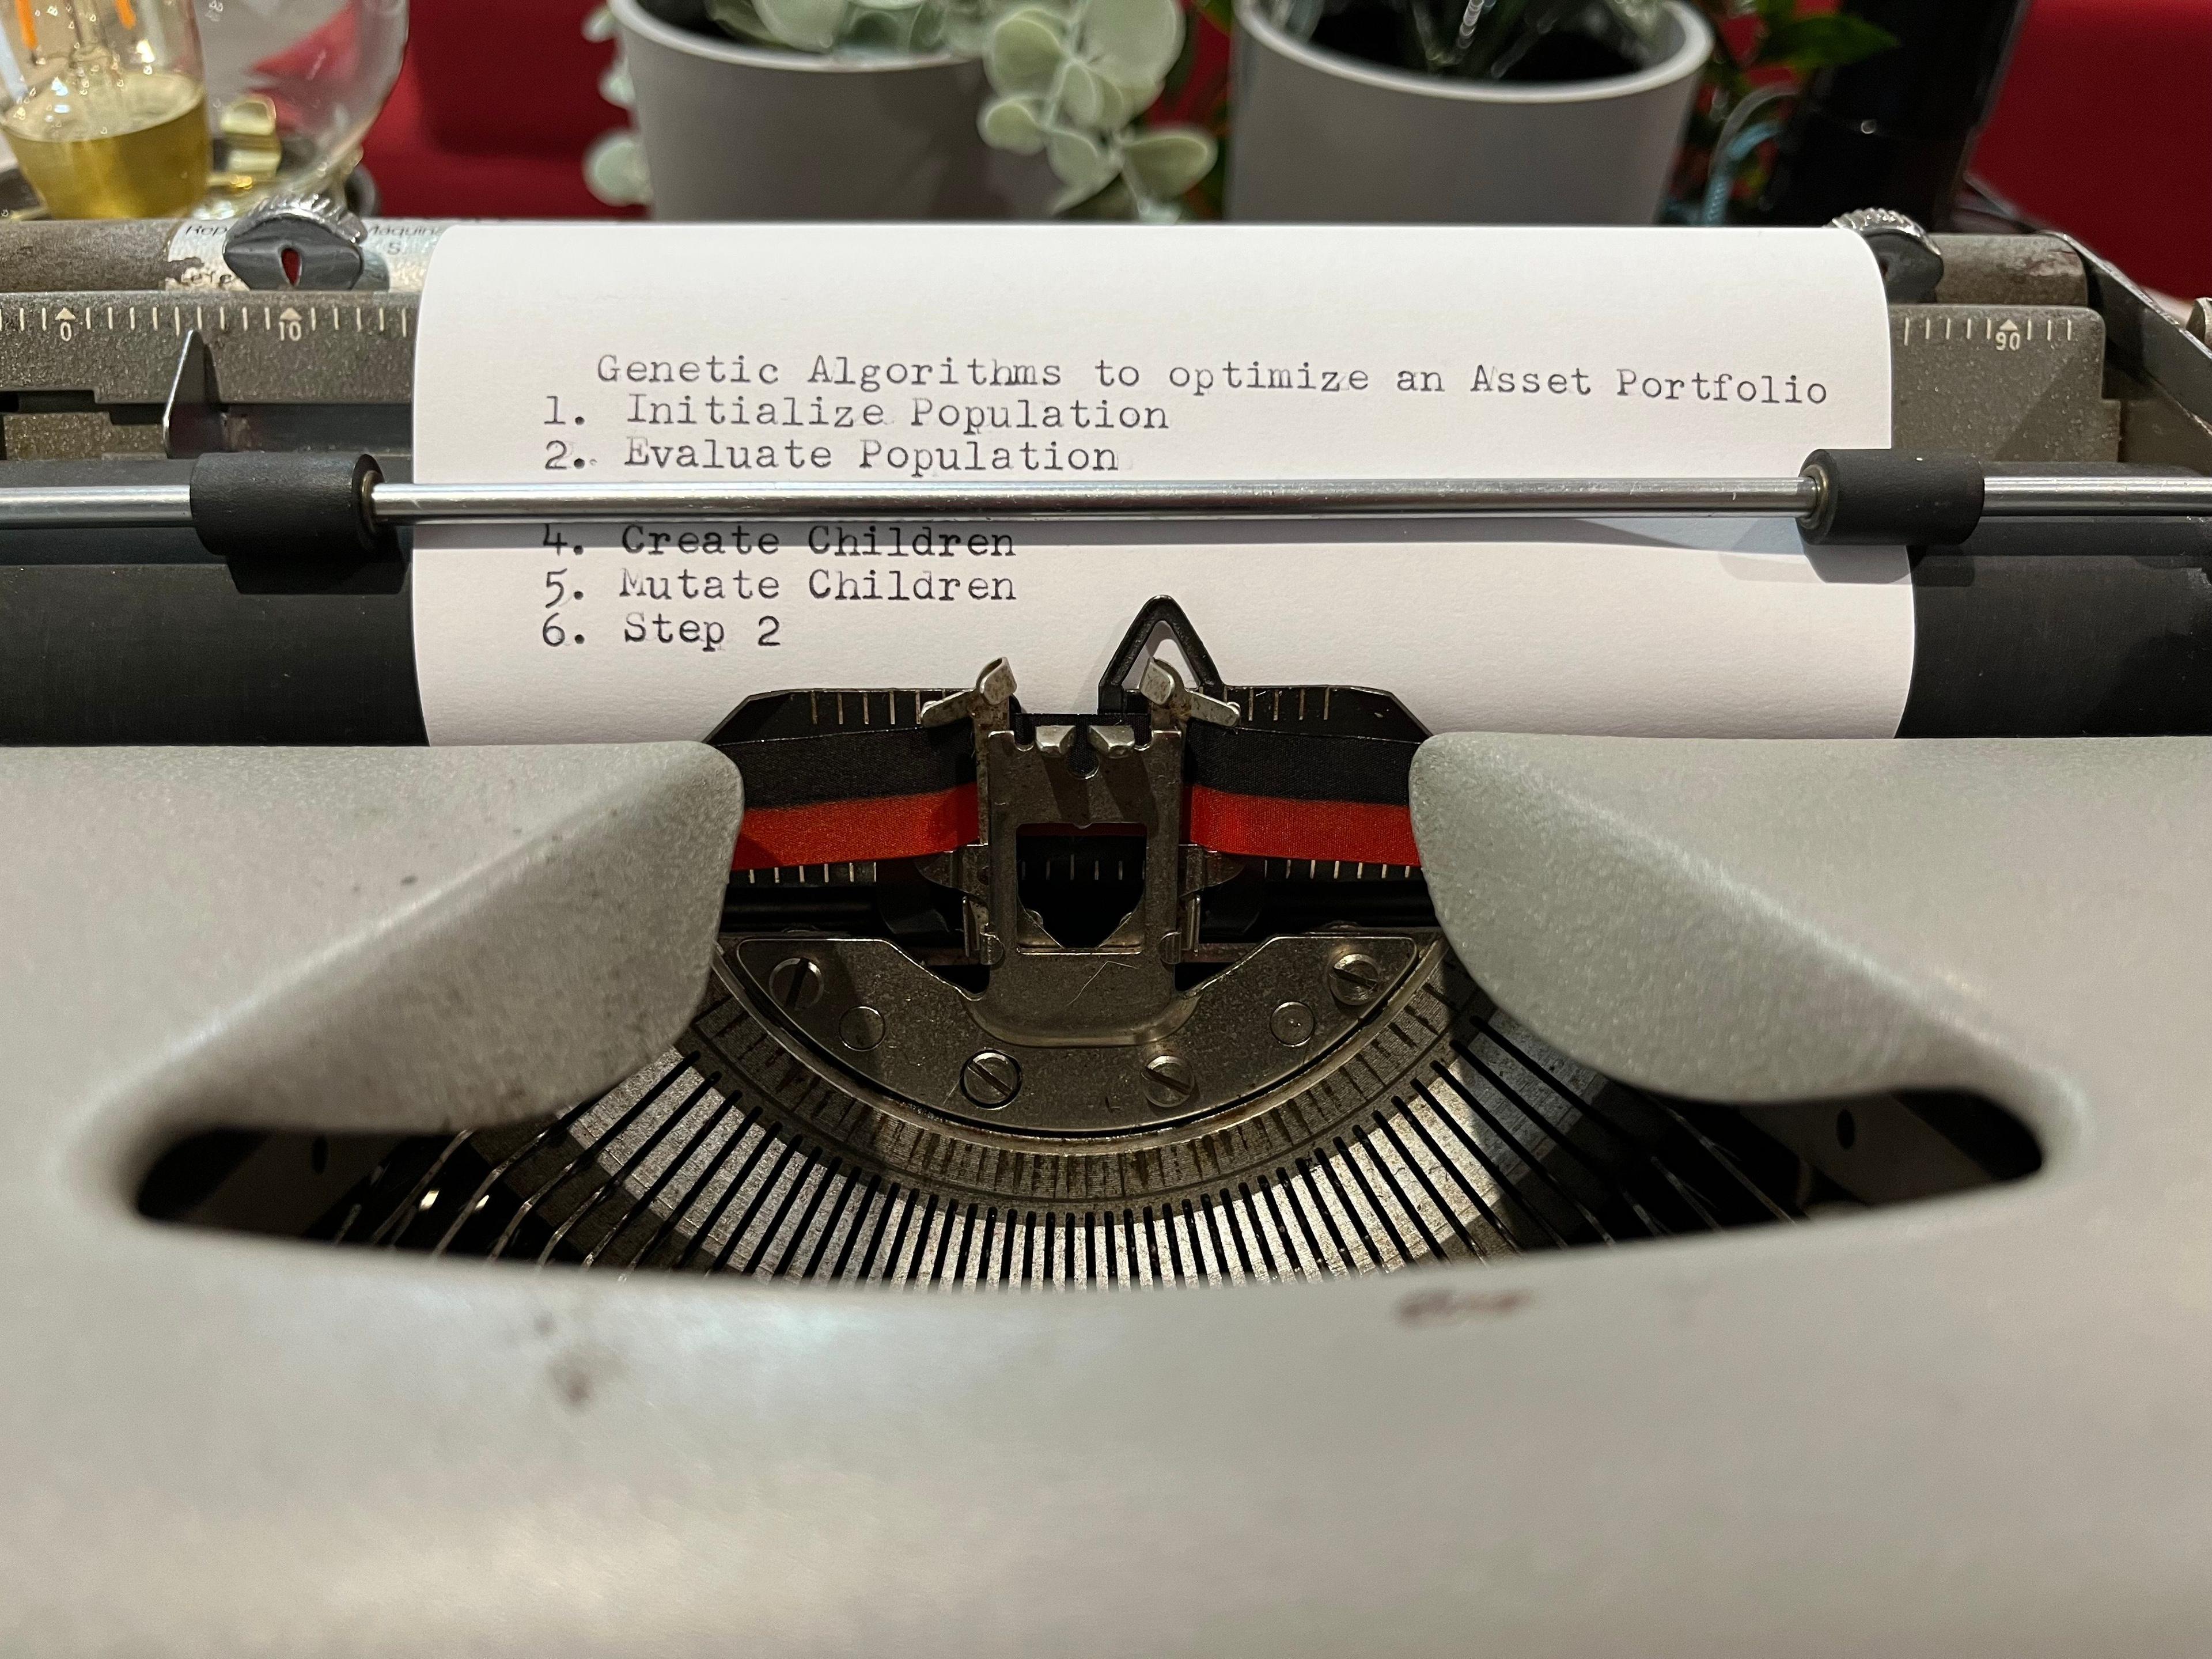 a typewriter with genetic algorithms steps